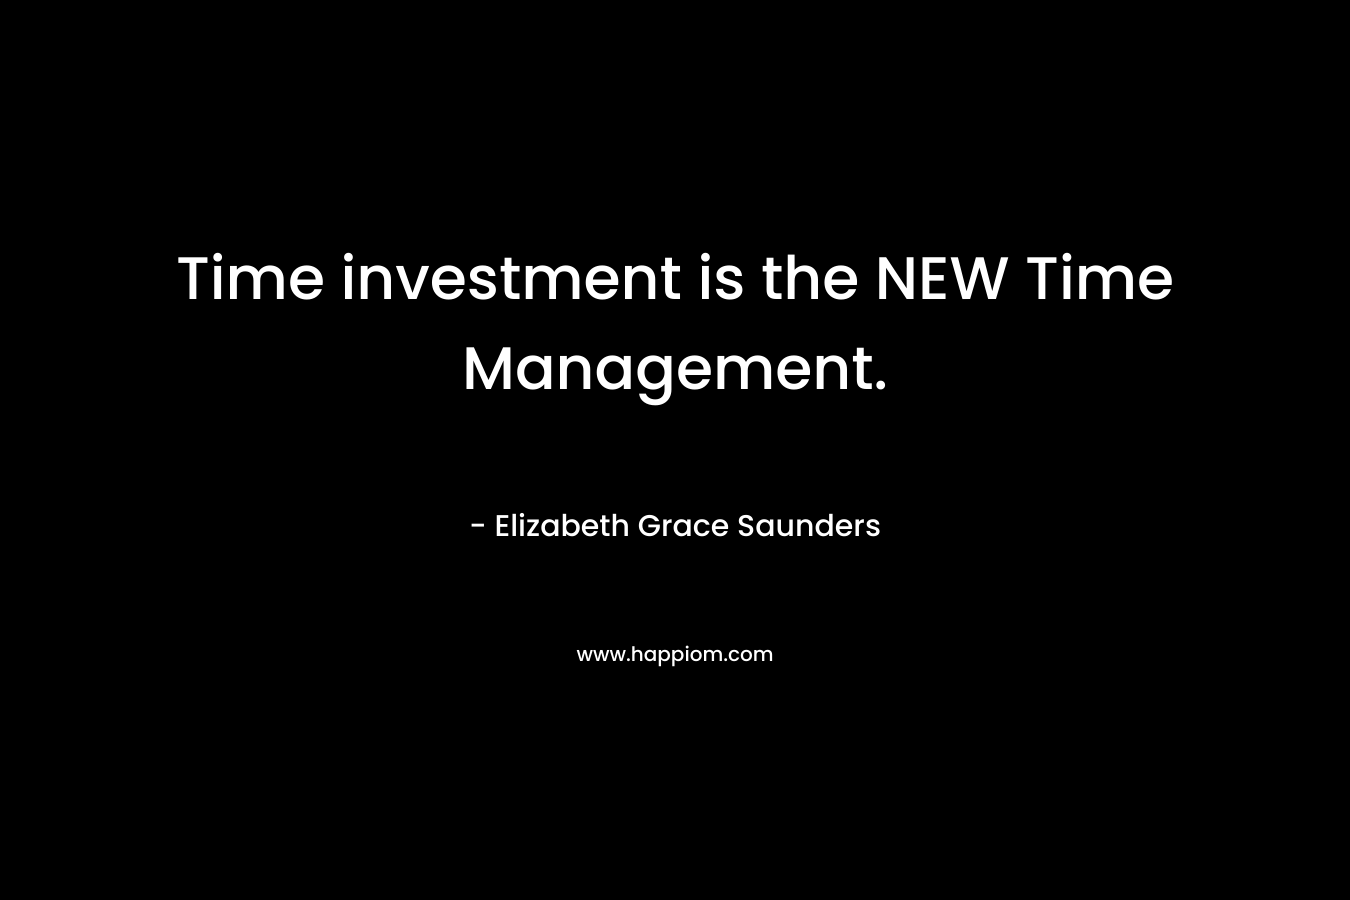 Time investment is the NEW Time Management. – Elizabeth Grace Saunders